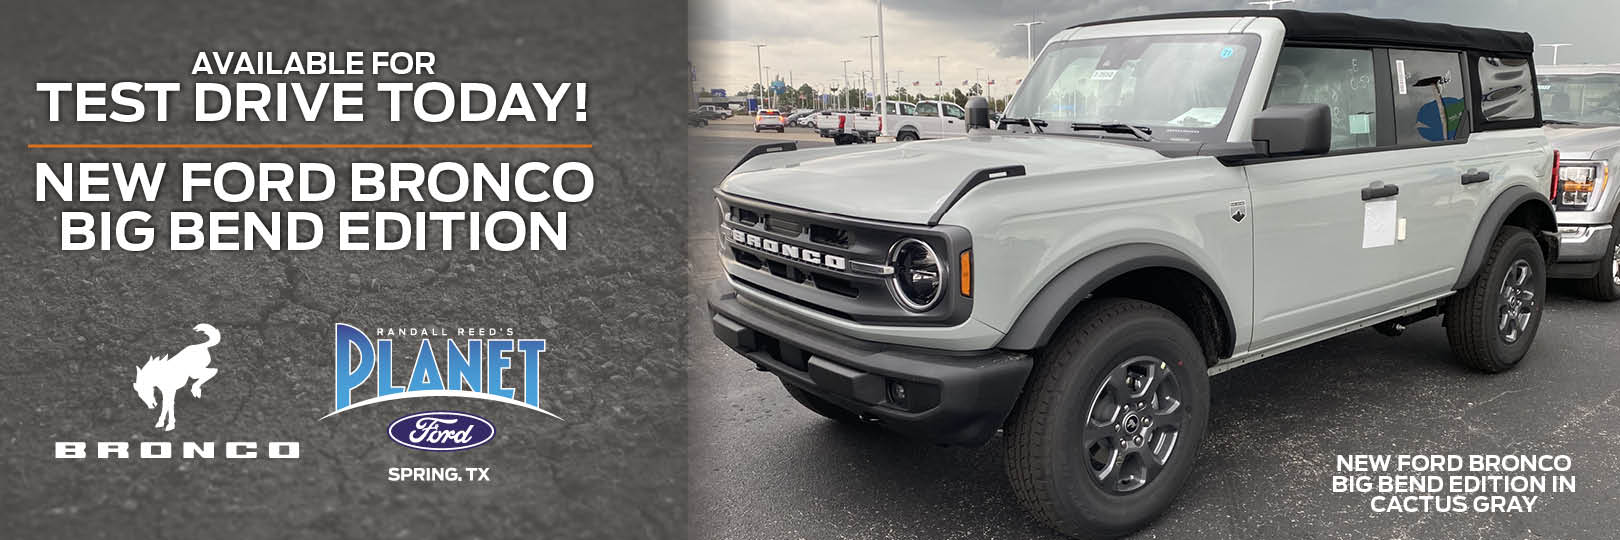 Ford Bronco available!